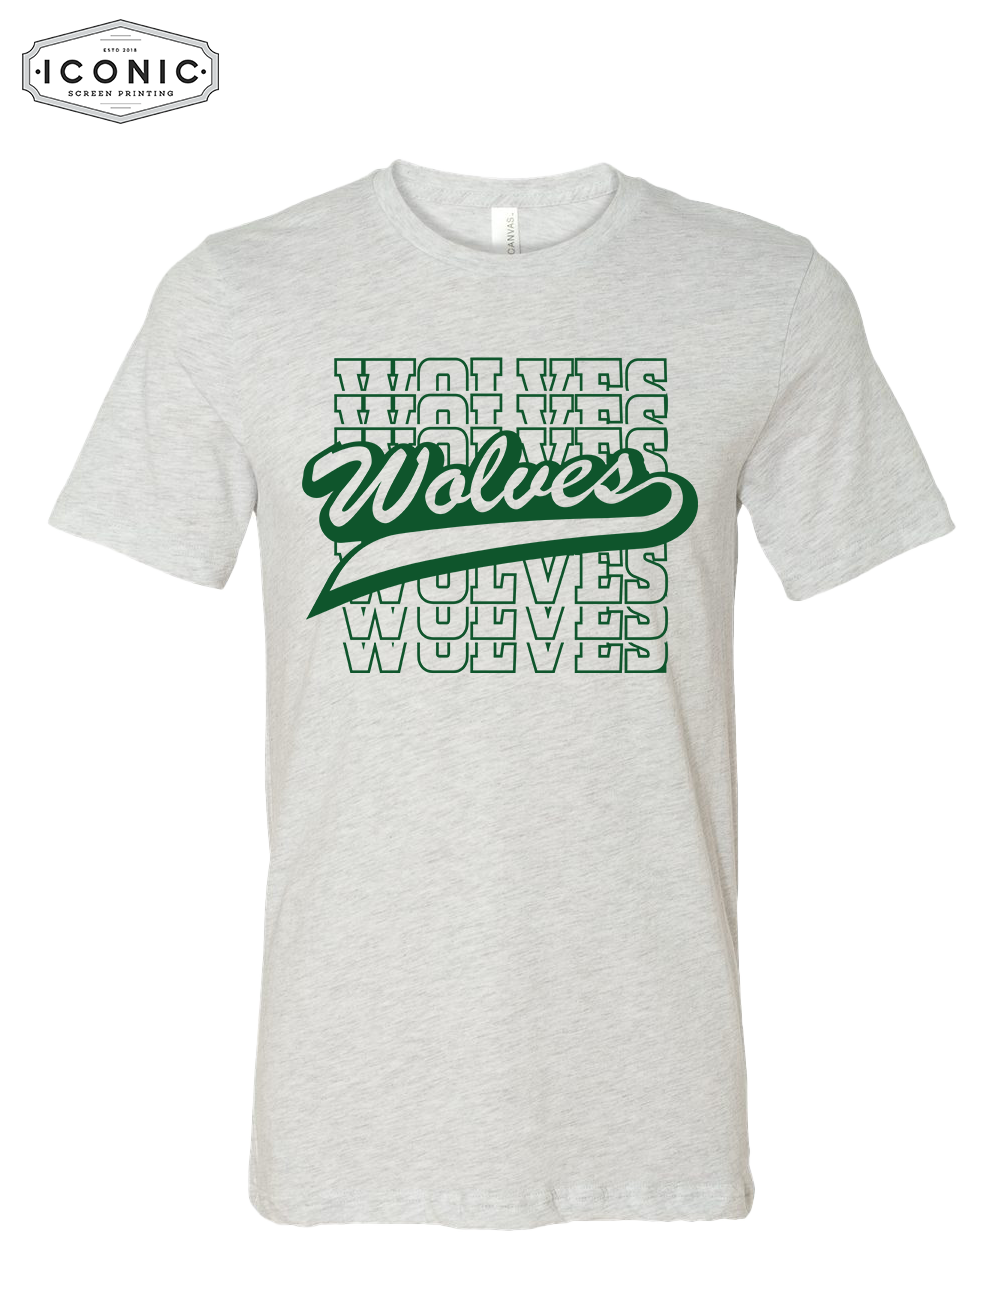 Wolves, Wolves, Wolves - Unisex Jersey Tee